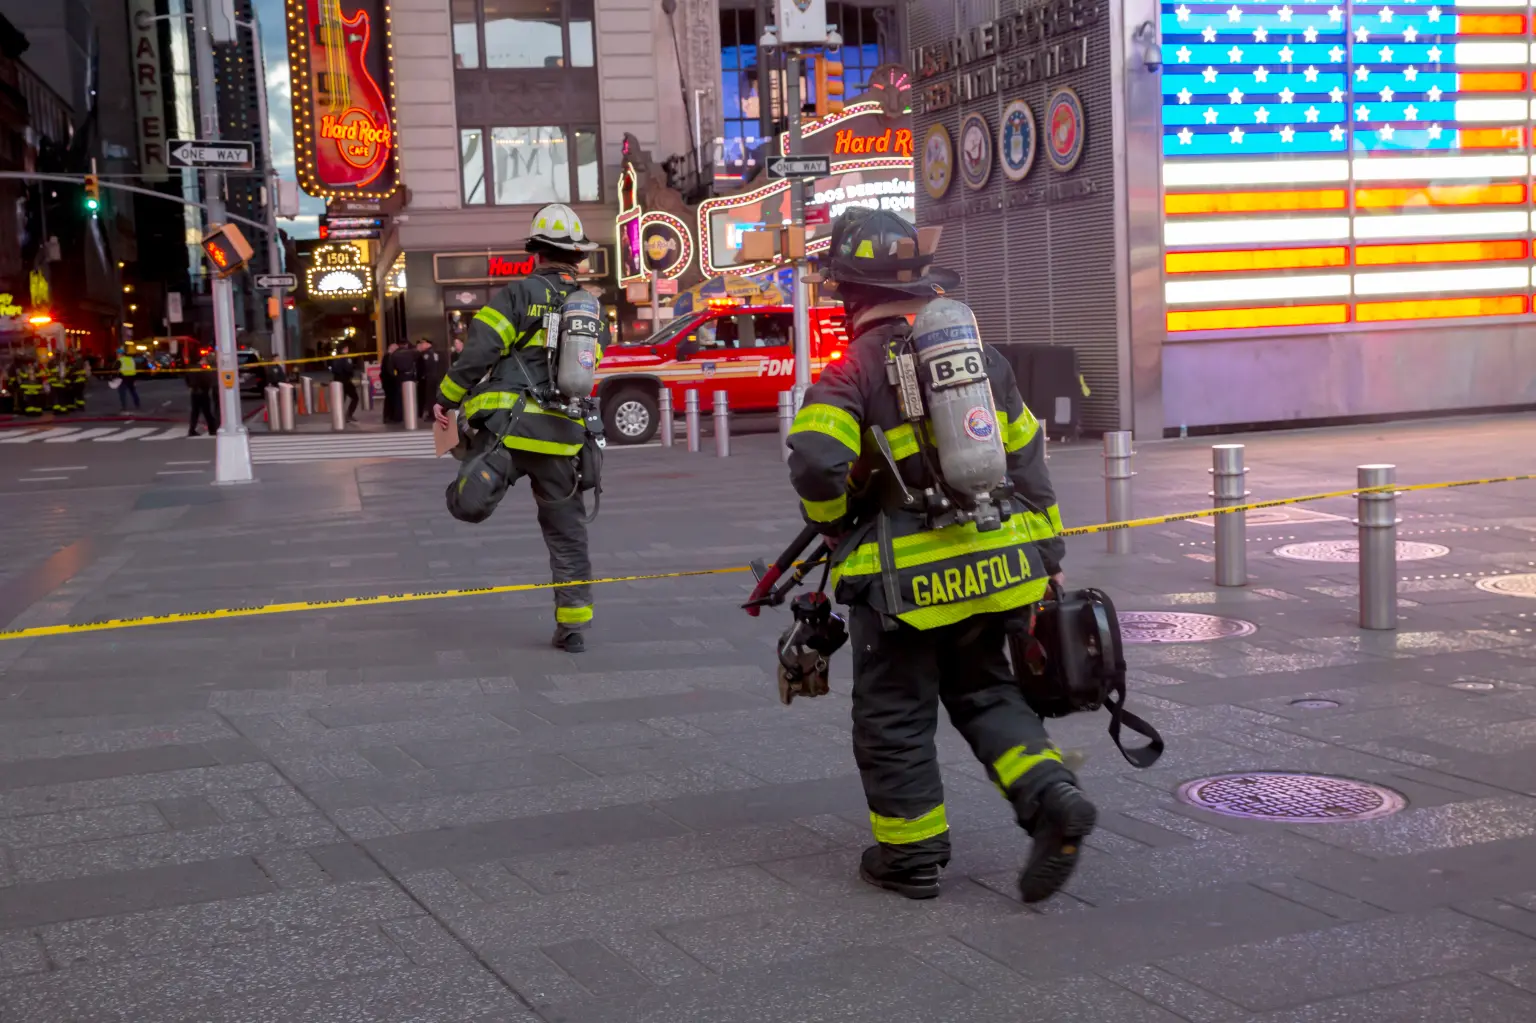 Times Square Manhole Explosion Alarms the City